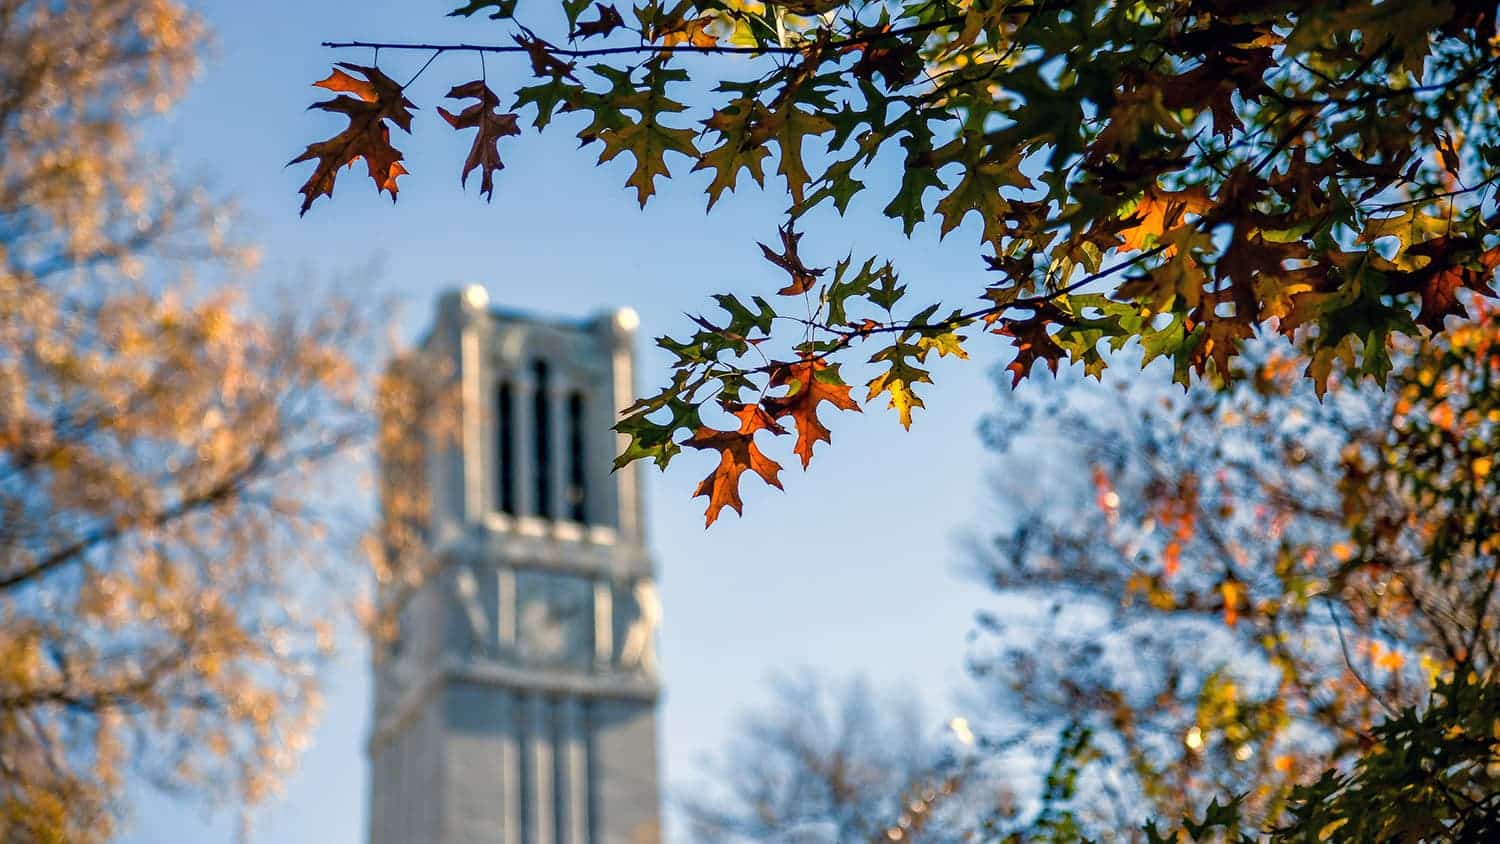 The Belltower with a branch of fall leaves in front.